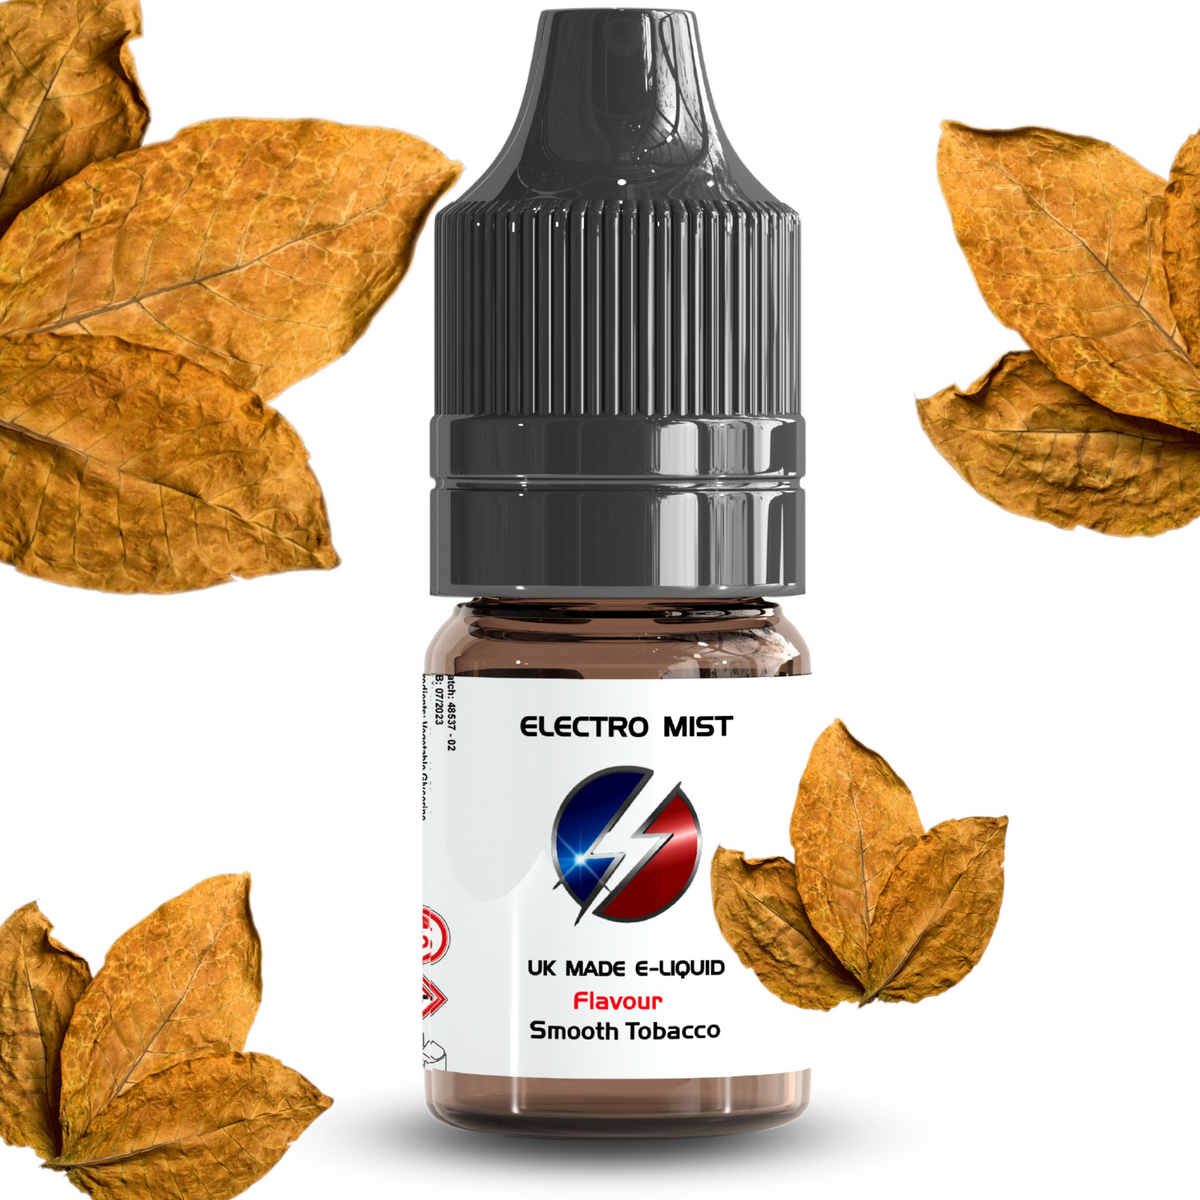 Electromist, the e-liquid brand you can trust. Get your taste buds ready for a flavour sensation, Smooth Tobacco. Nicotine Content: 3mg/6mg/12mg. Products may contain nicotine. For over 18s Only ejuice, vape pen, eliquid, e cigarette, 10ml, vaping, cloud, PG, VG, 60/40, vape liquid, Flavour